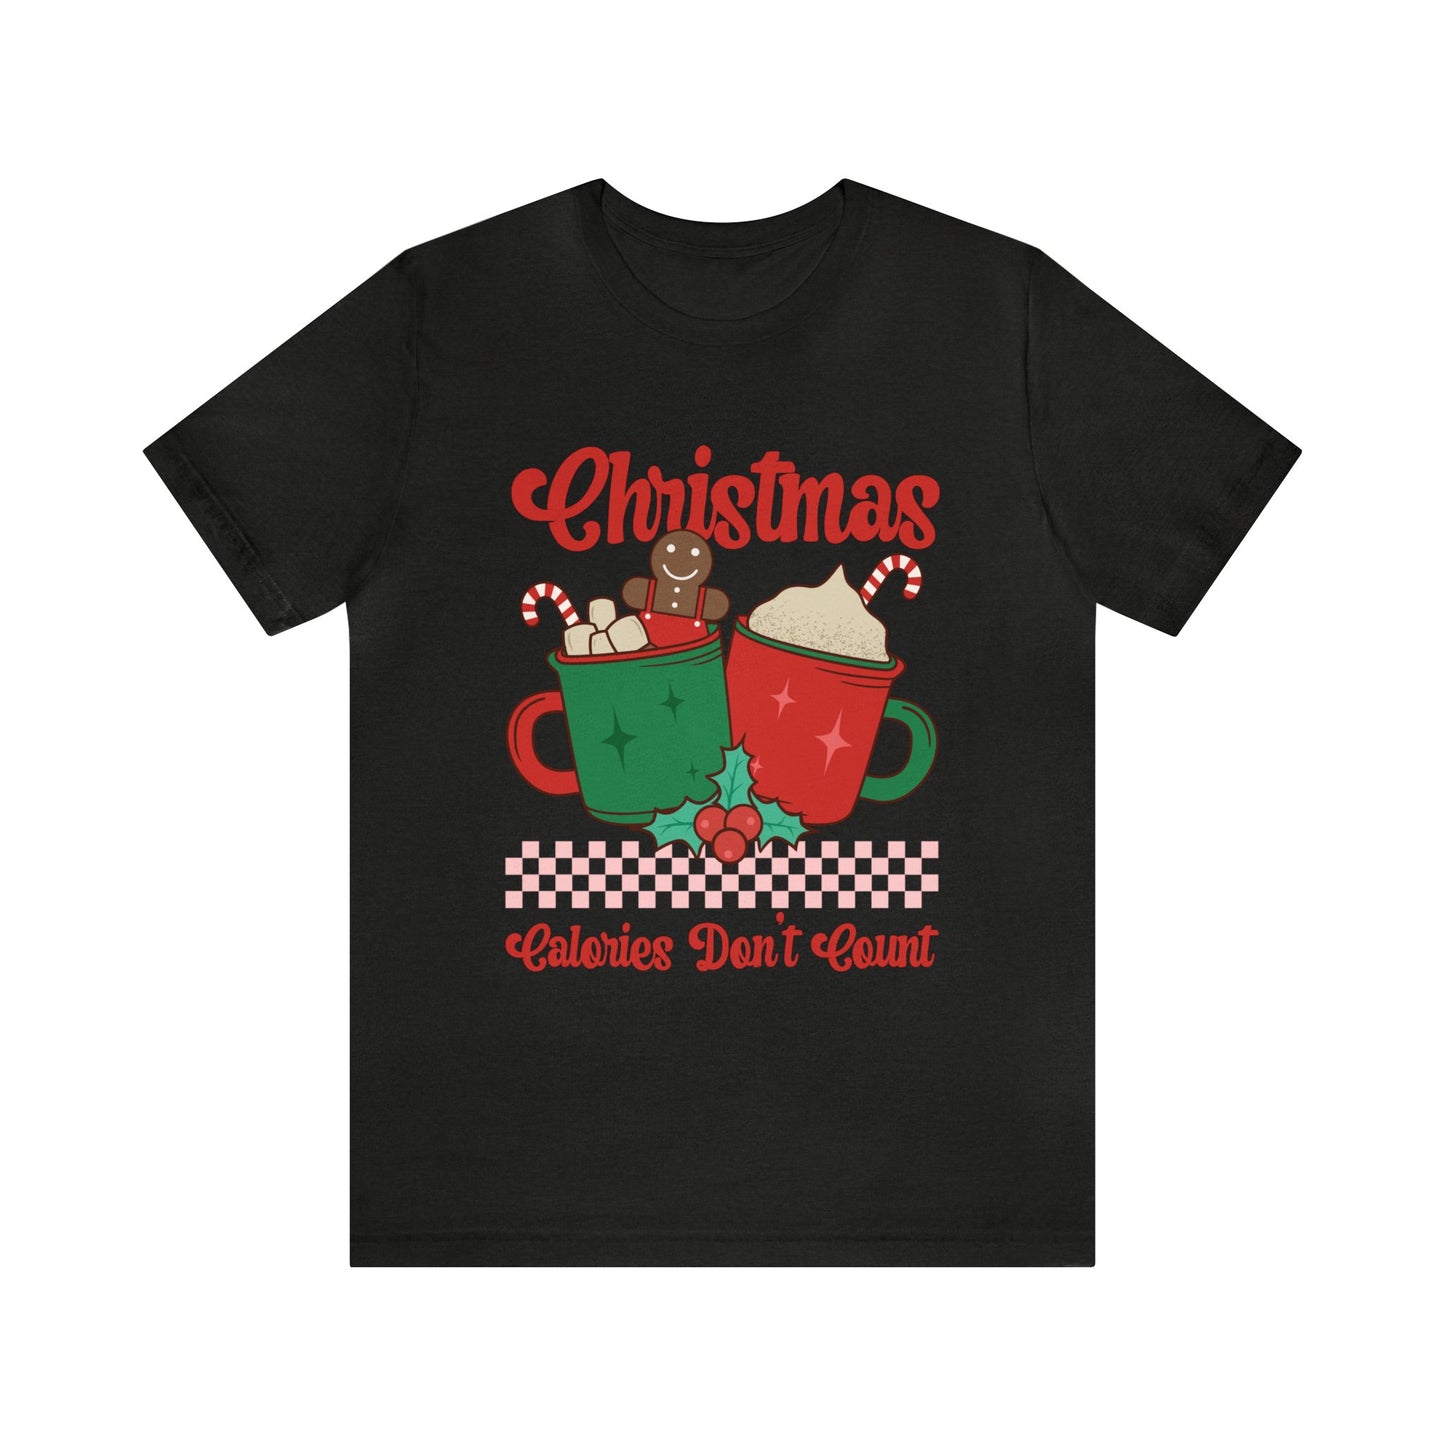 Christmas Calories Don't Count Short Sleeve Women's Tee